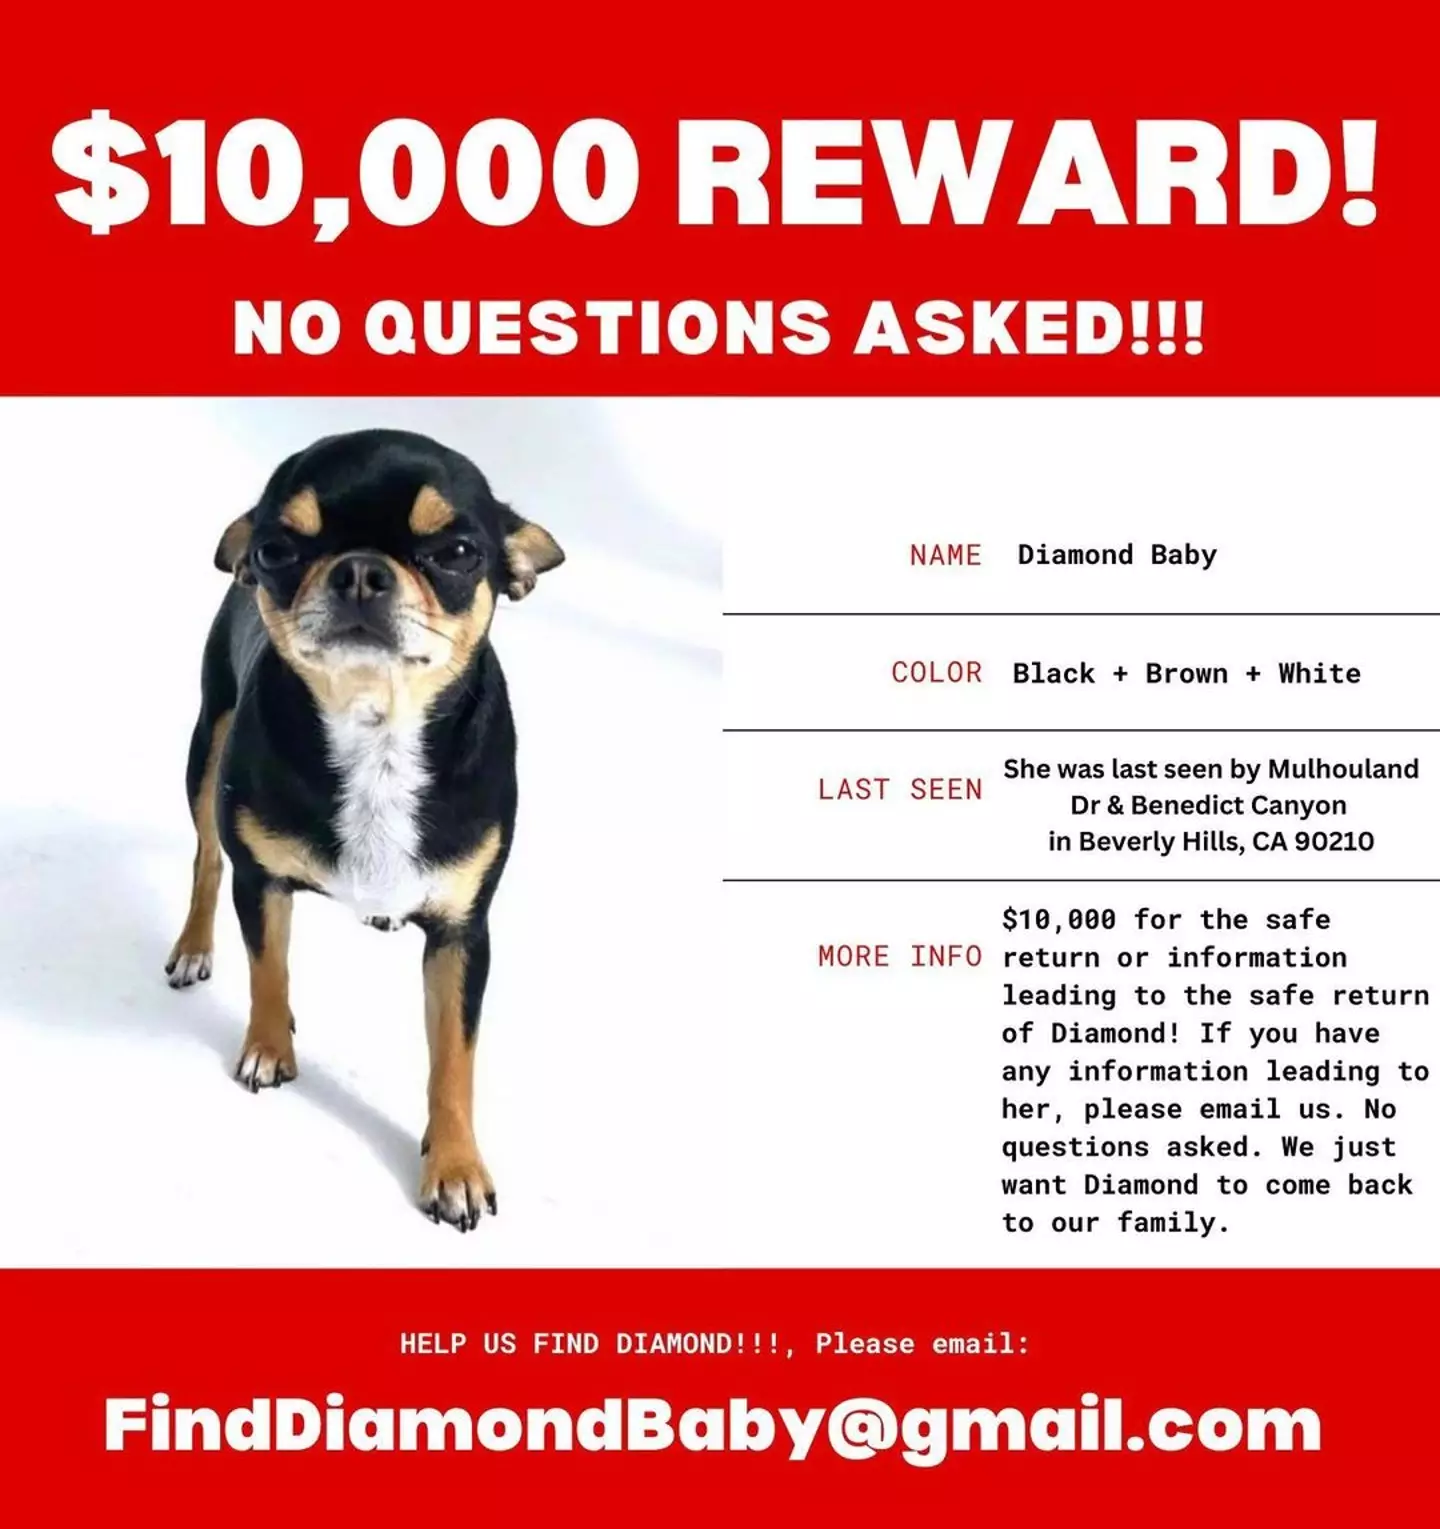 Hilton is offering $10,000 to anyone who can help to find Diamond Baby.